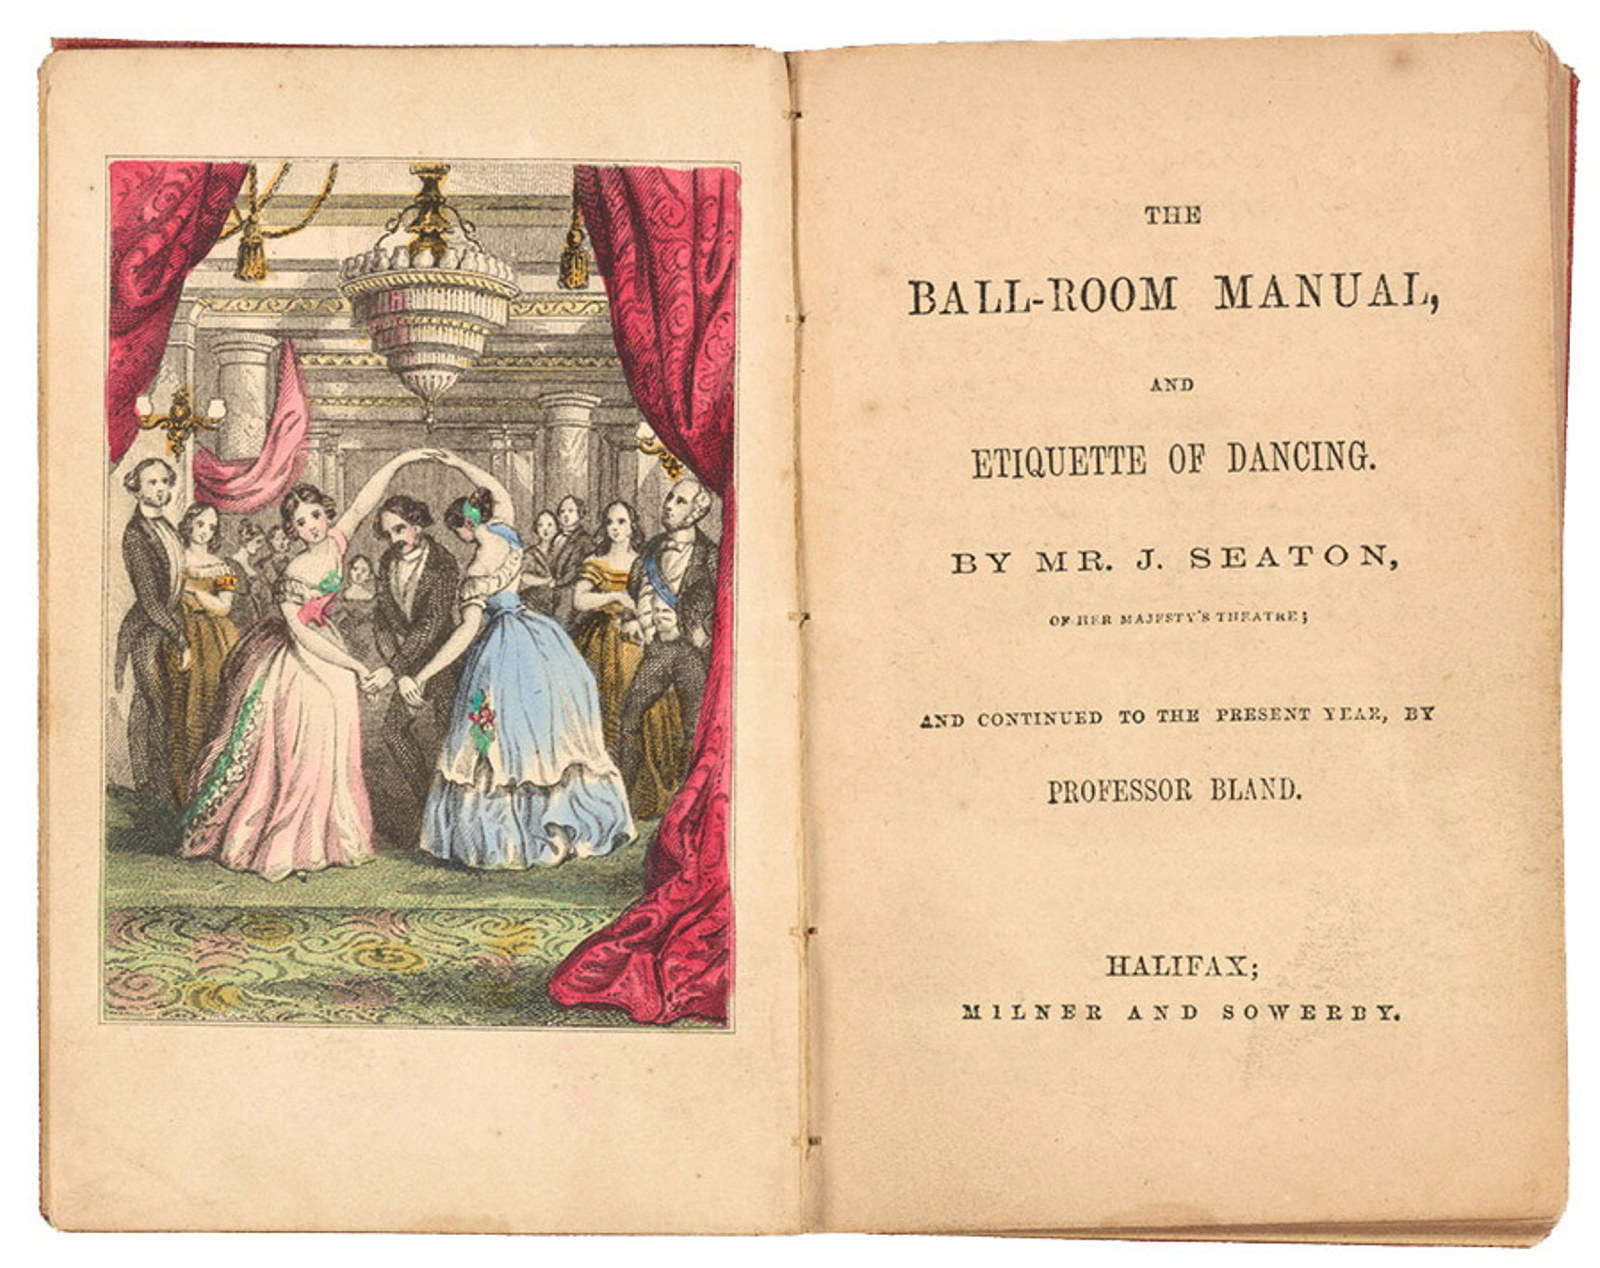 The ball-room manual, and etiquette of dancing / by Mr. J. Seaton ; and continued to the present year, by Professor Bland , 1855